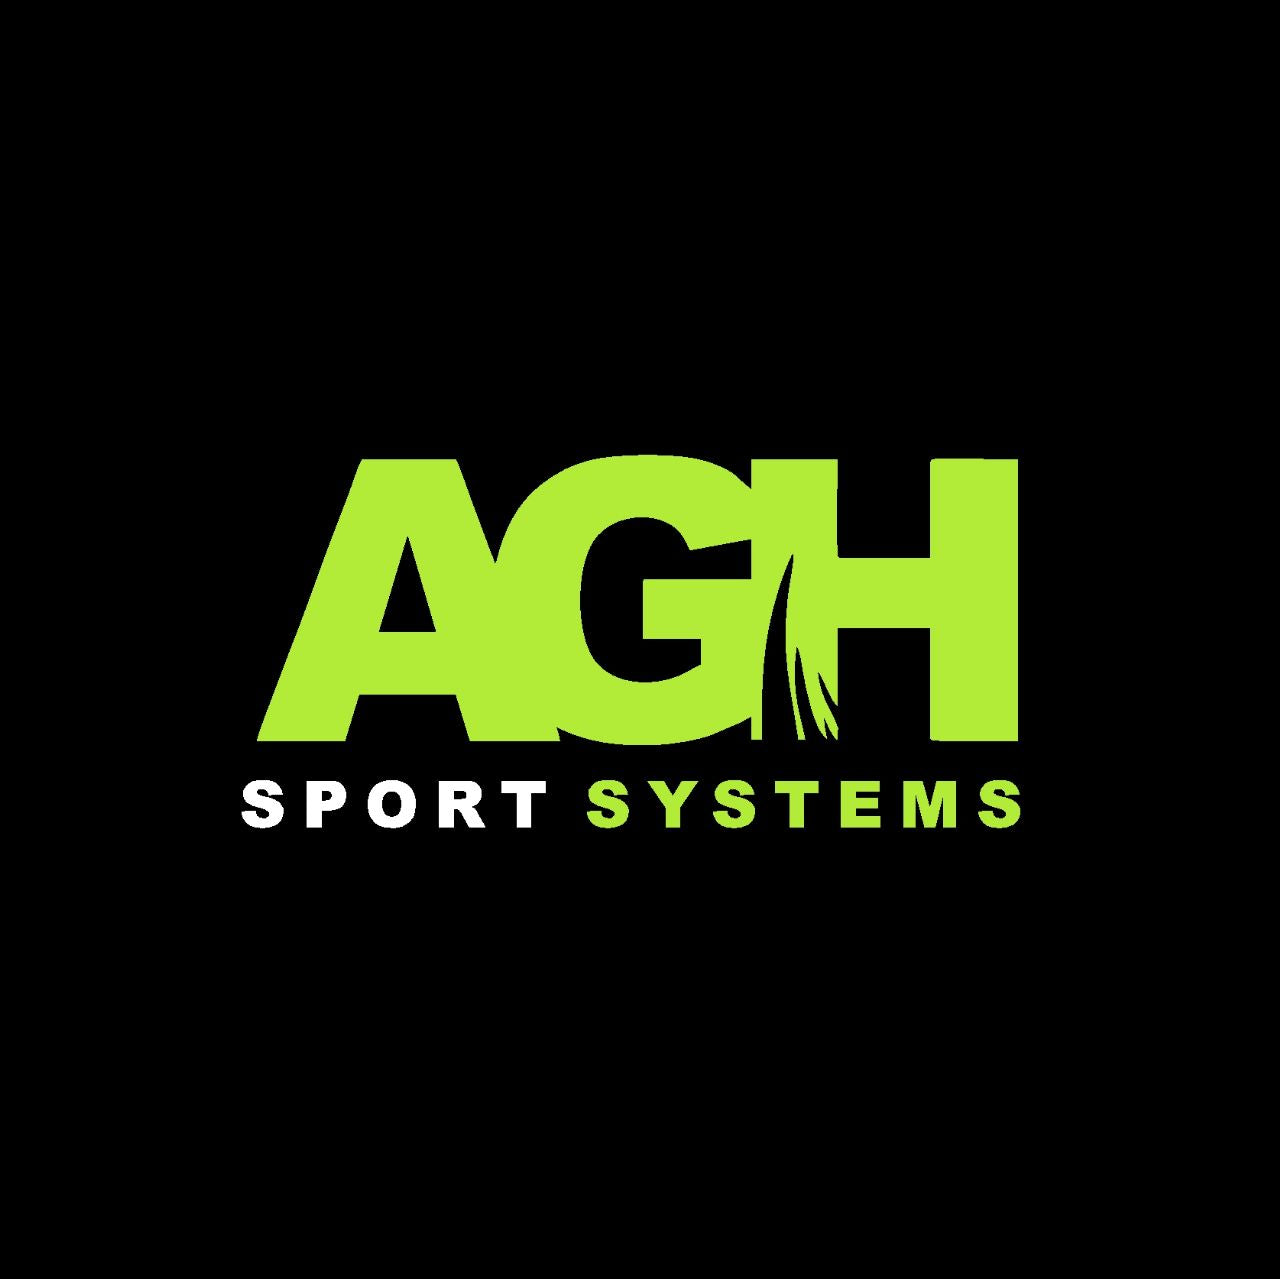 AGH Sport Systems logo of Drop Shot's preferred supplier for the installation of Drop Shot Panoramic Courts.